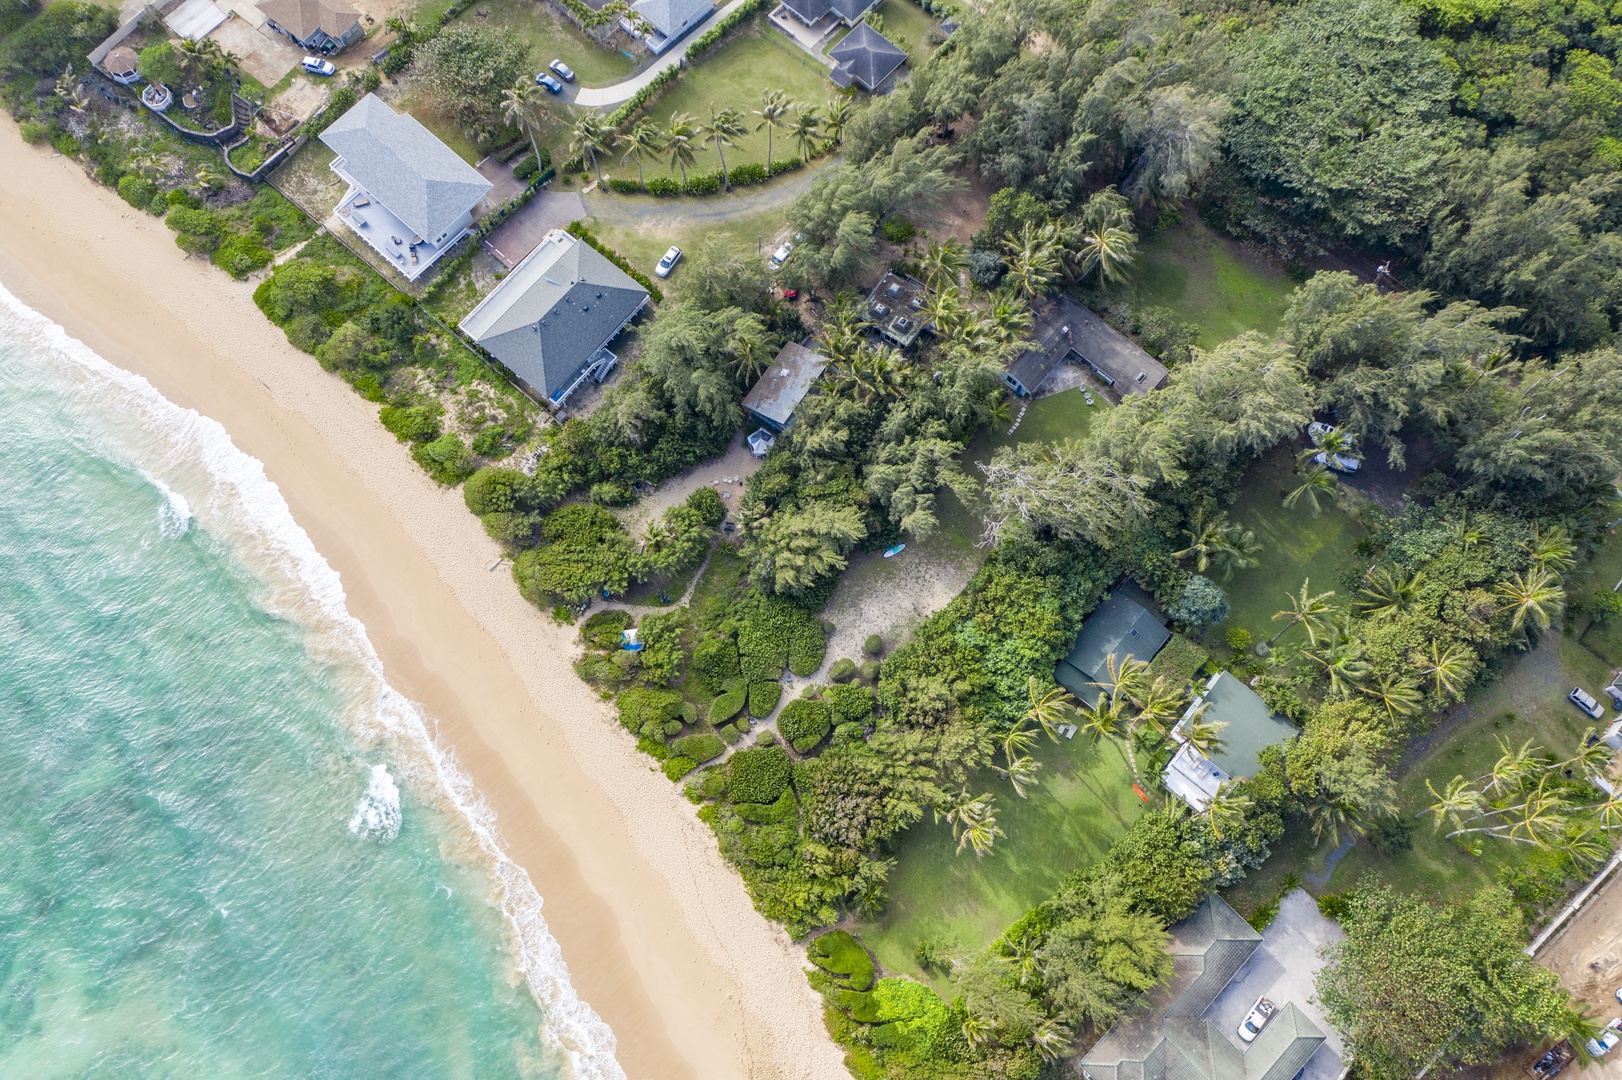 Kahuku Vacation Rentals, Hale Ula Ula - Malaekahana is a lesser traveled beach, making it a perfect place for relaxing and getting away from it all